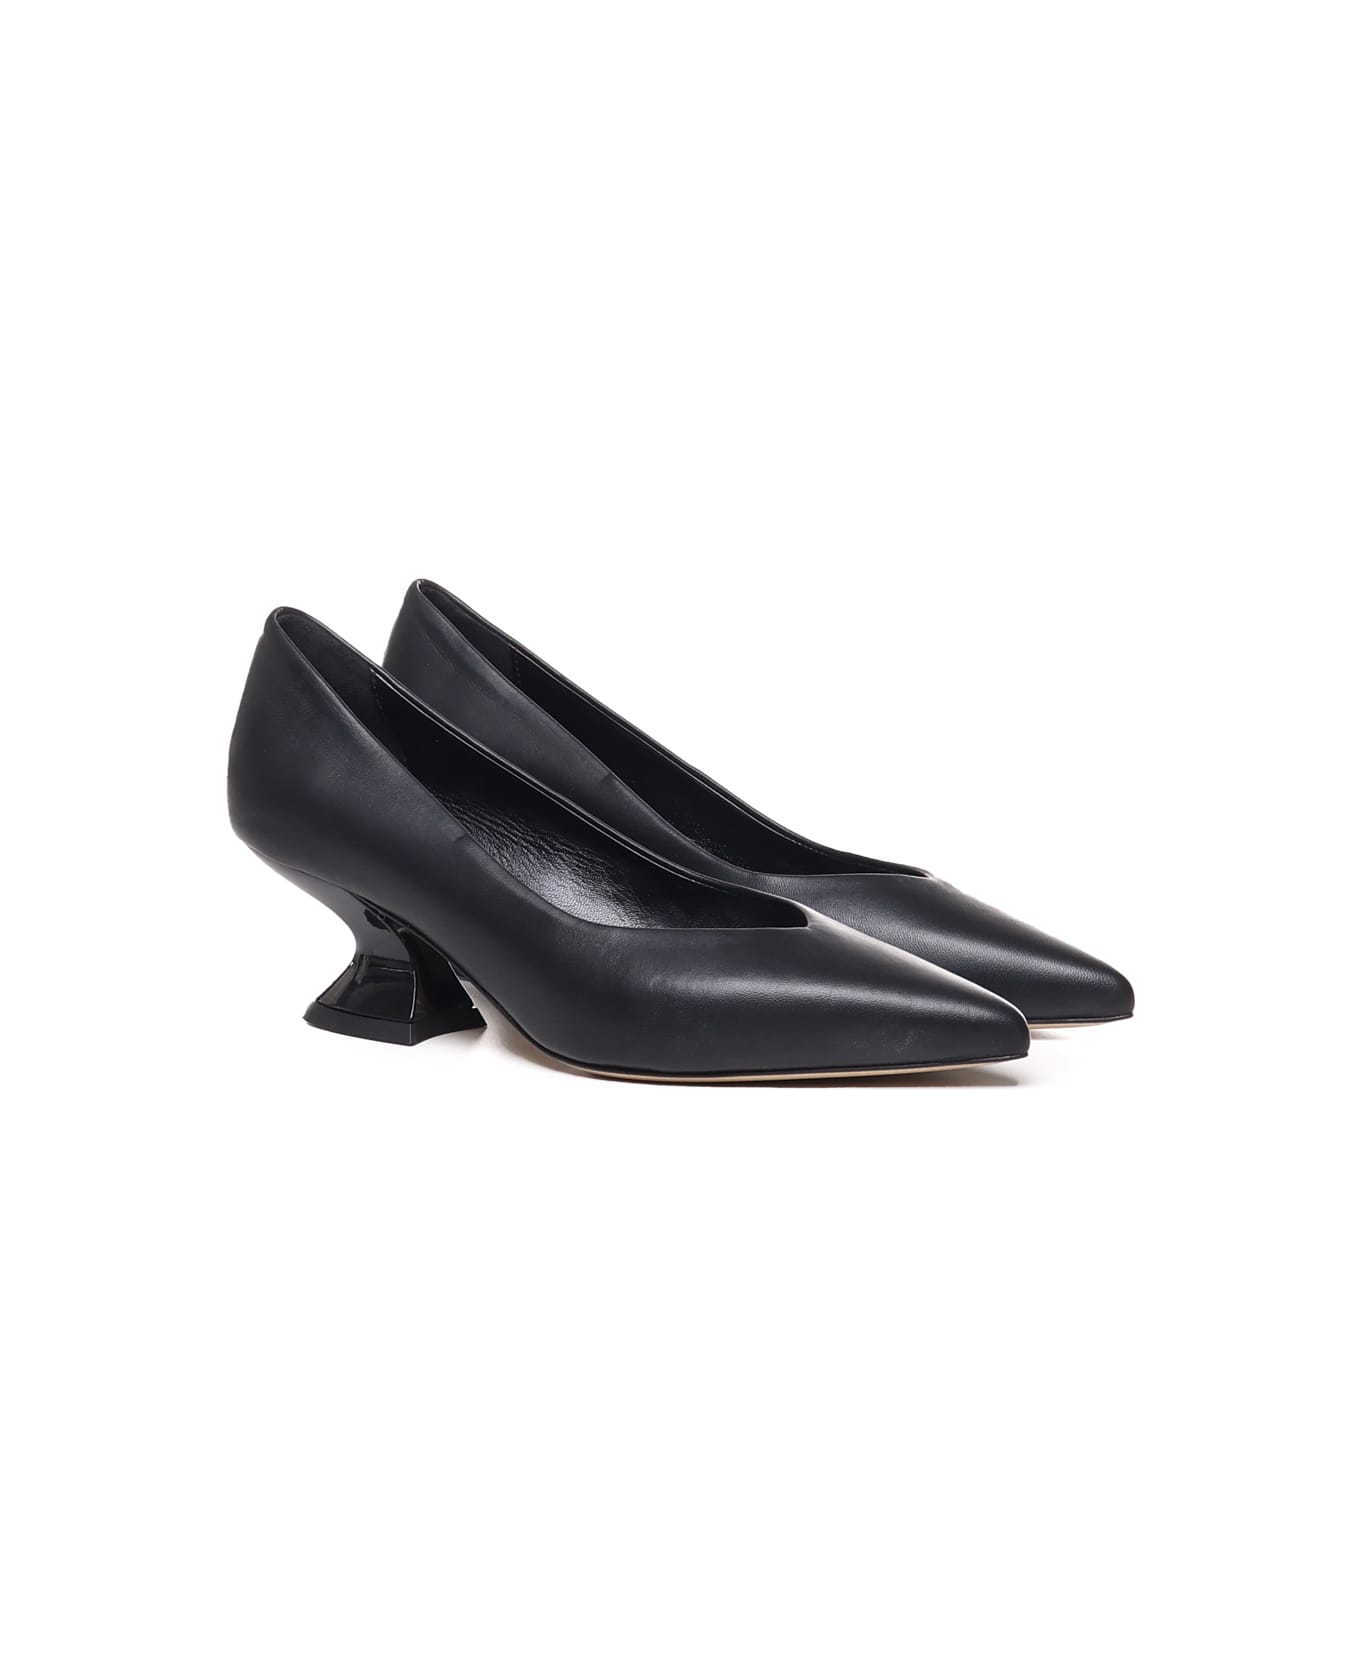 Alchimia Leather Pumps With Wide Heel - Black